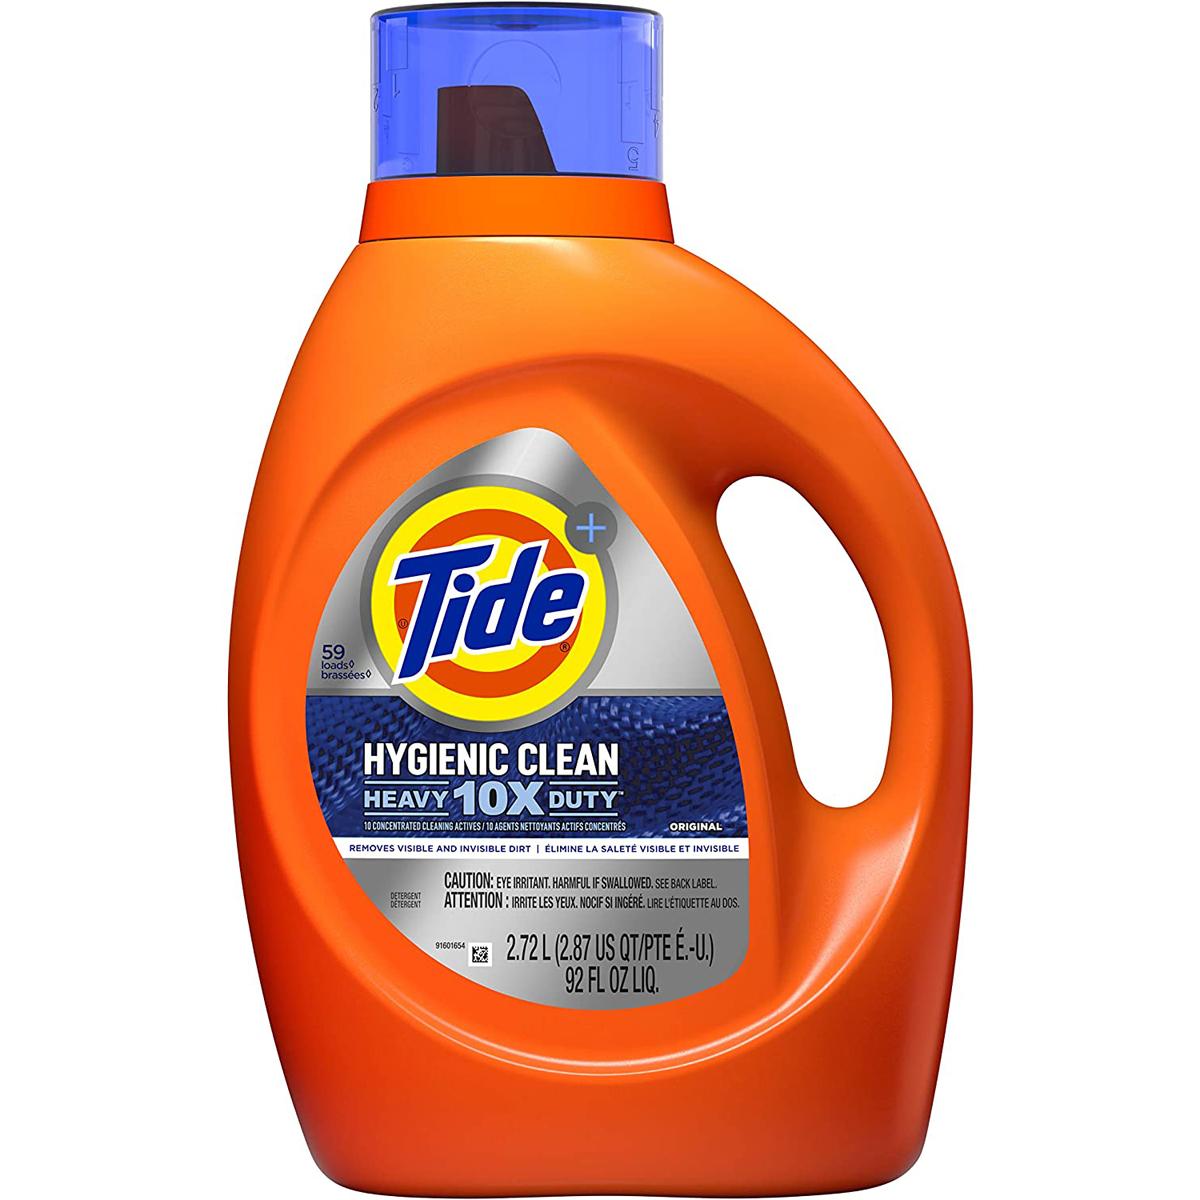 Tide Hygienic Clean Heavy 10x Duty Liquid Laundry Detergent for $8.39 Shipped